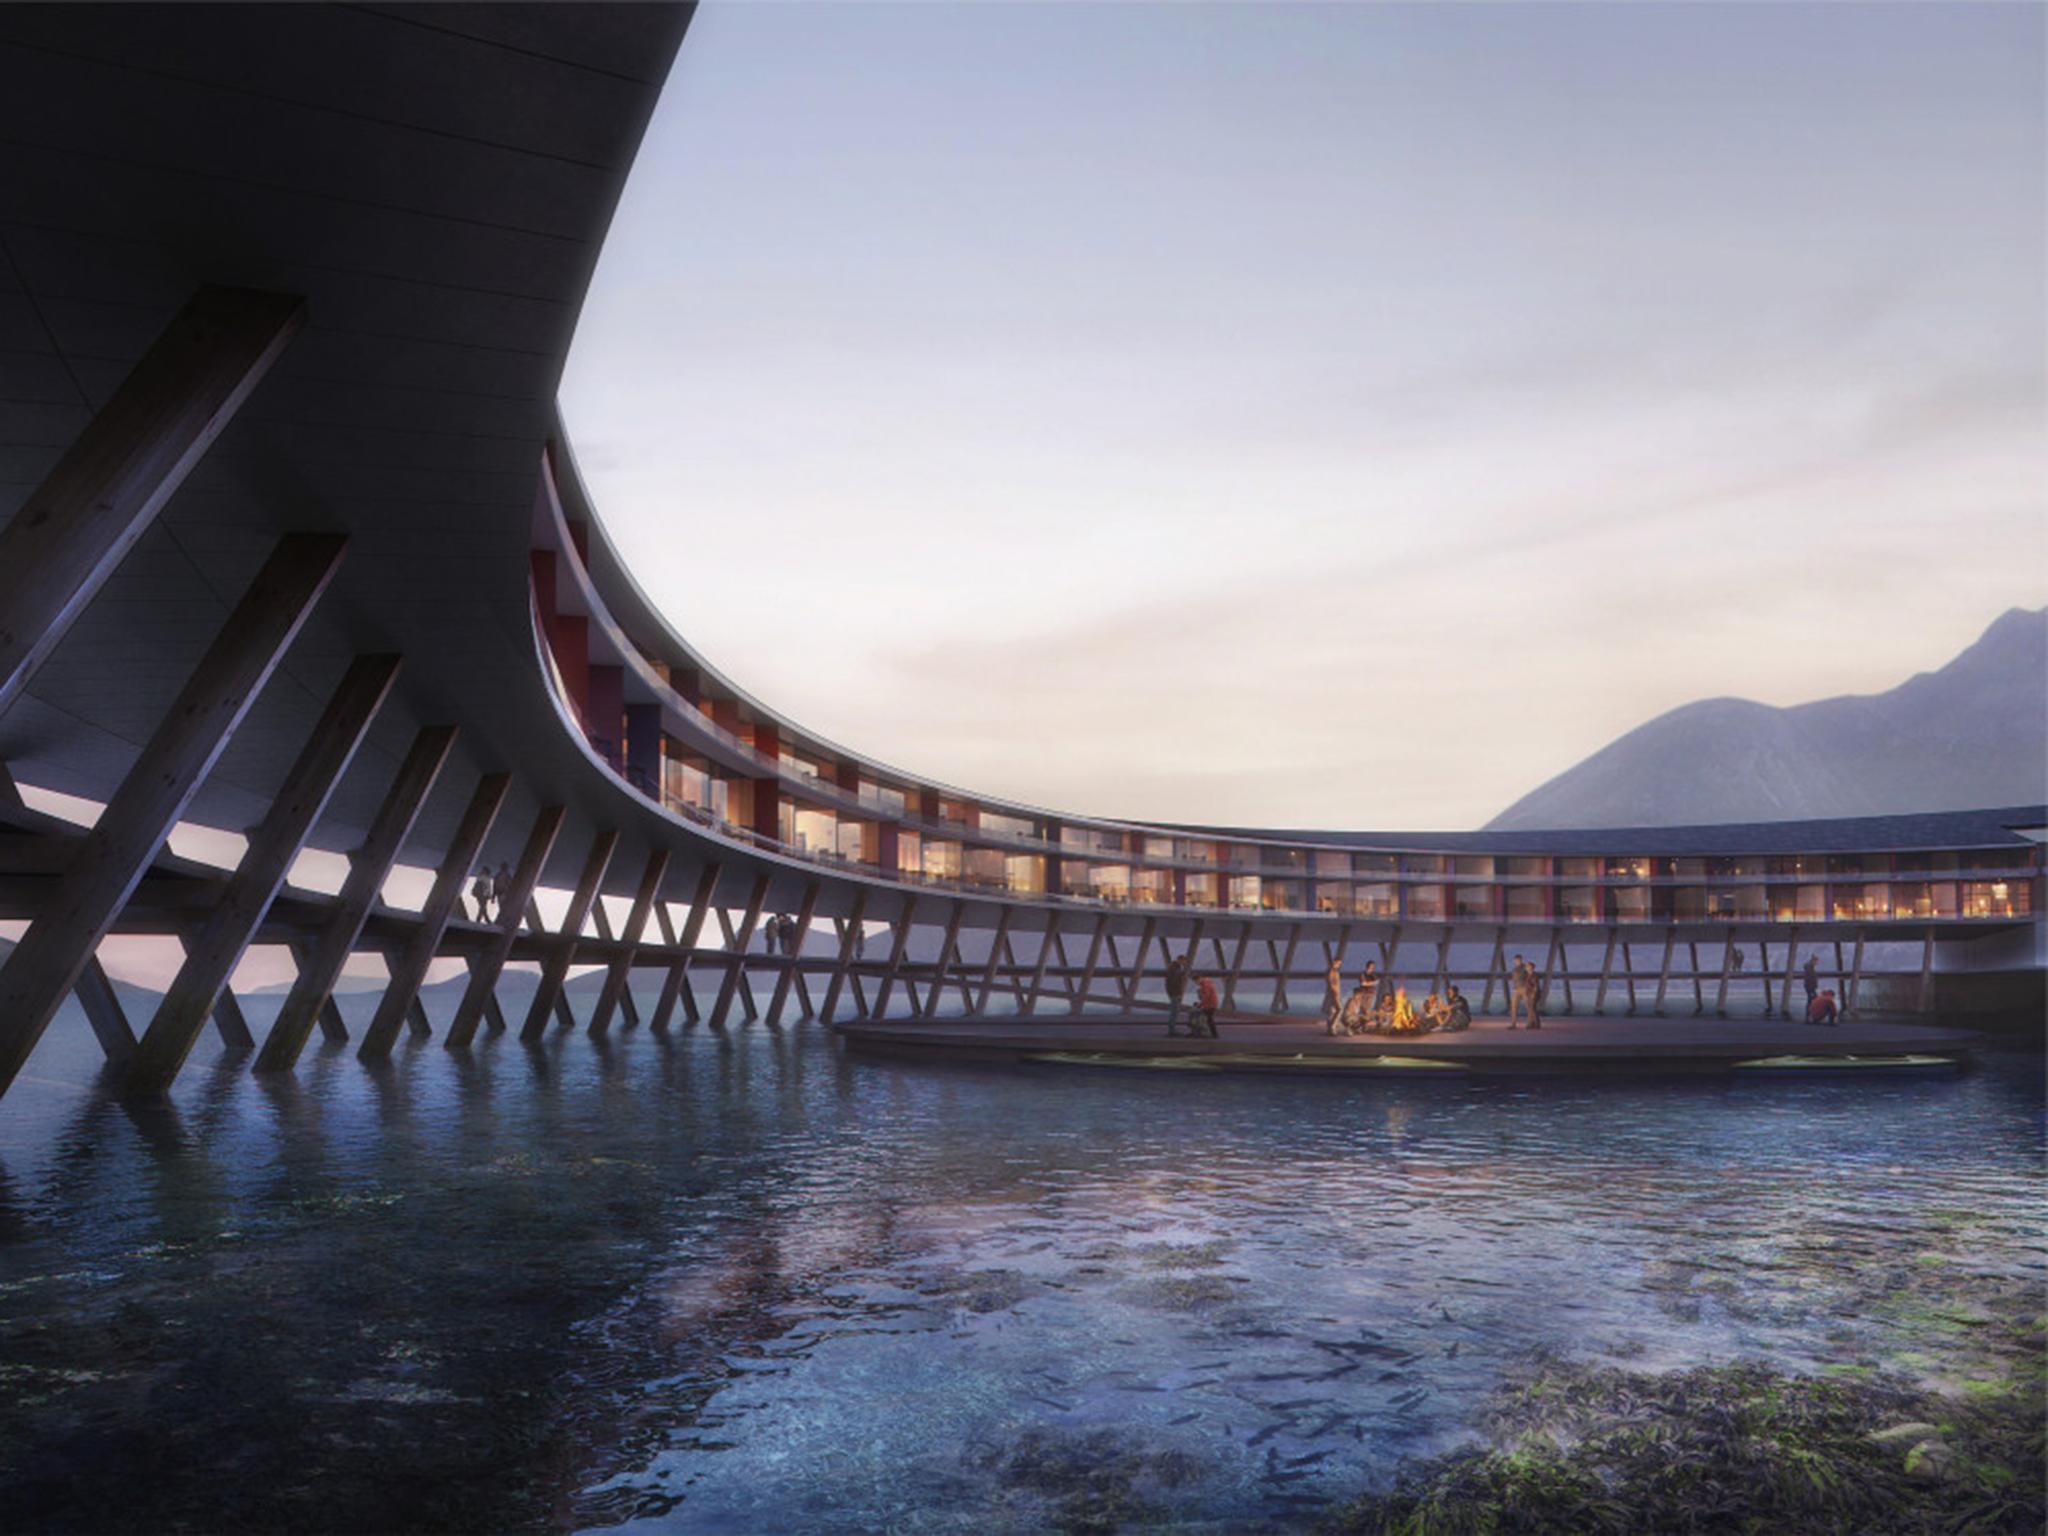 The hotel will be suspended above the water on V-shaped stilts to reduce its environmental impact.